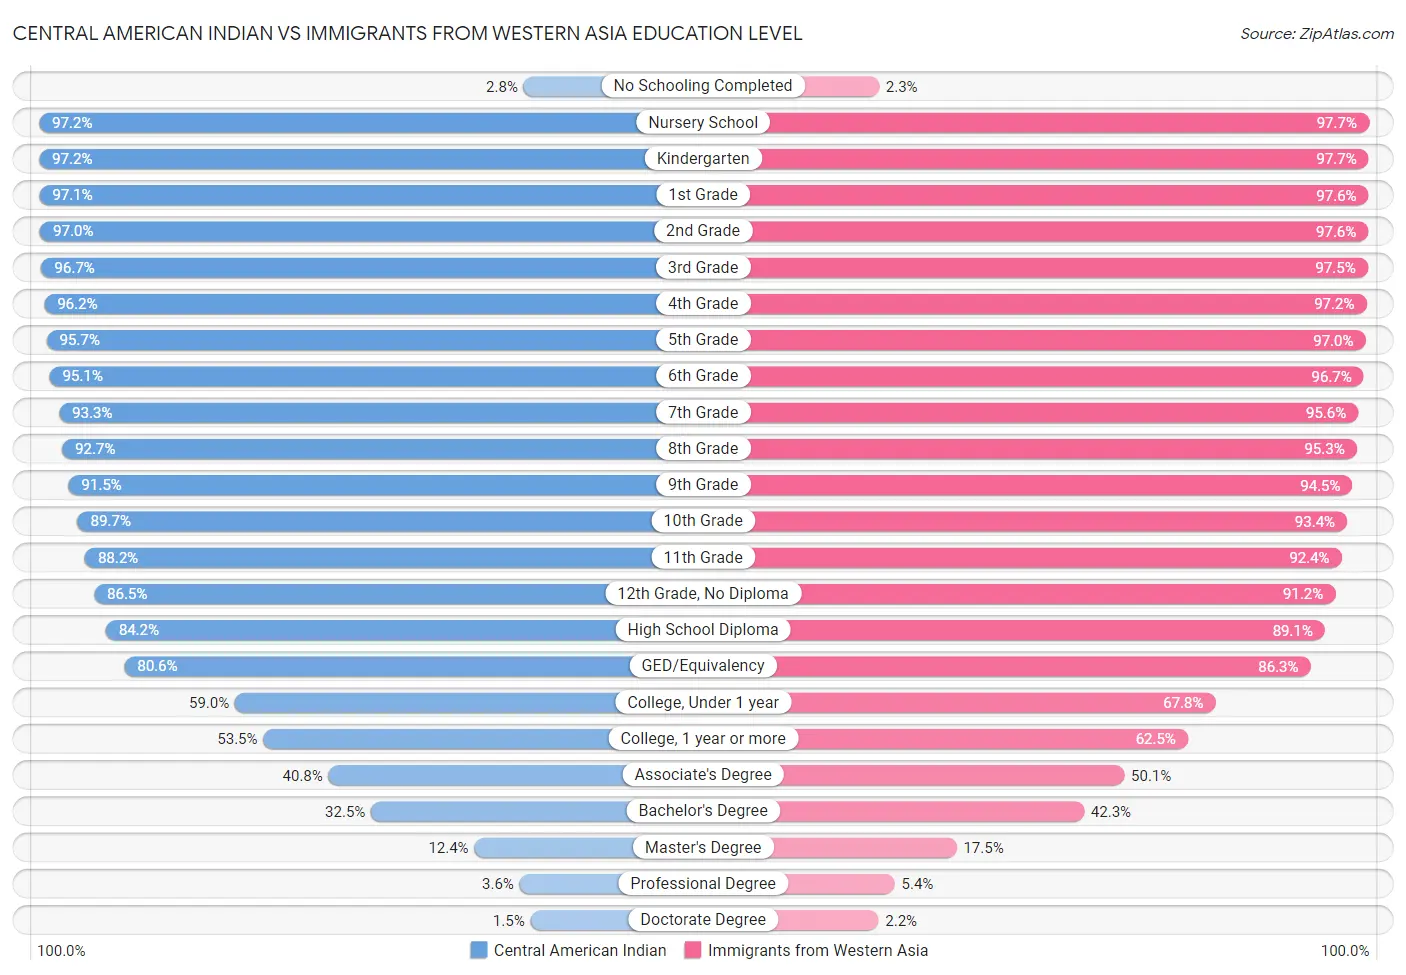 Central American Indian vs Immigrants from Western Asia Education Level